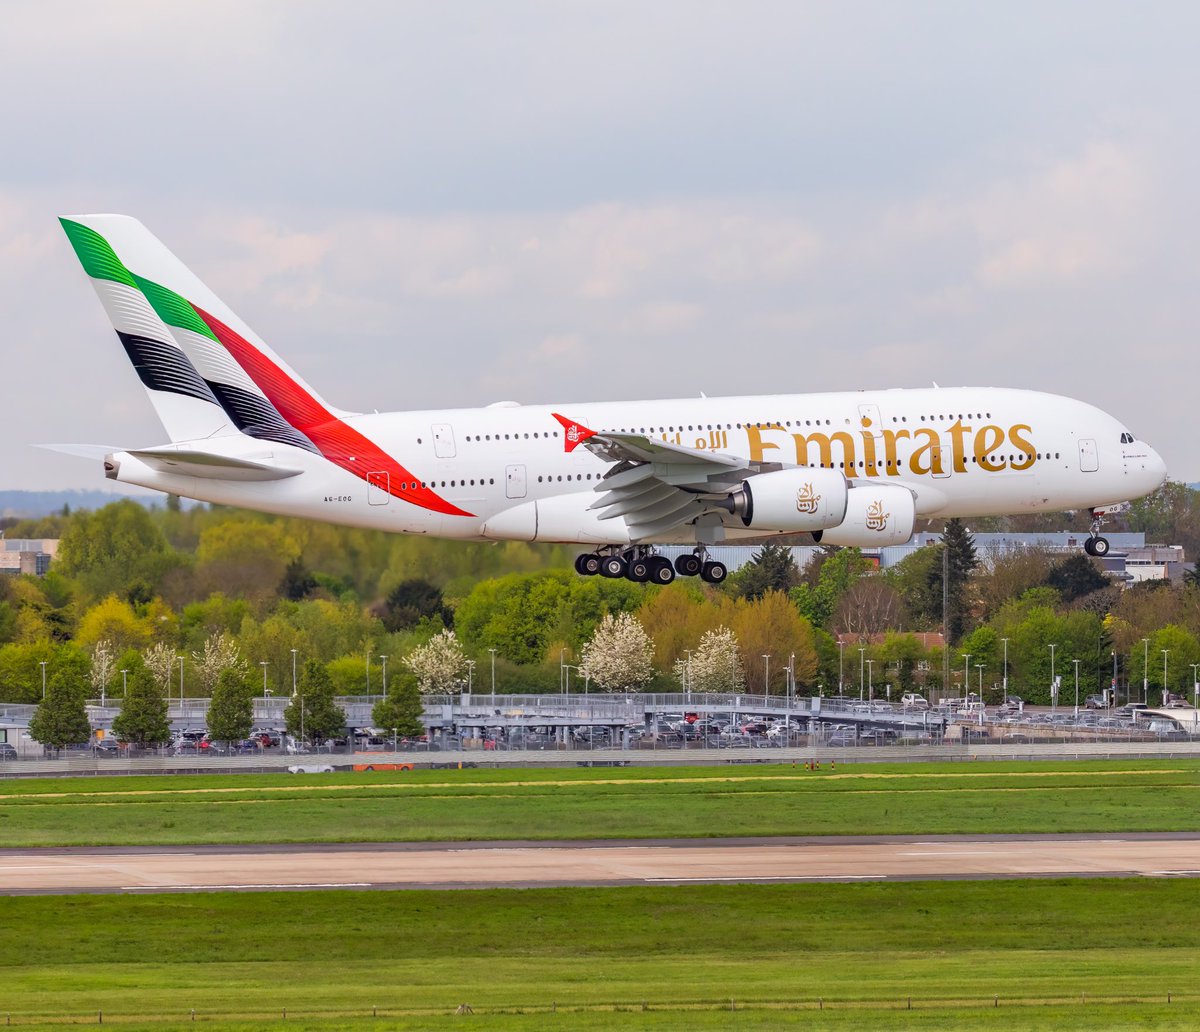 Opinions on the new @emirates livery? A6-EOG on its first visit to @HeathrowAirport this afternoon!